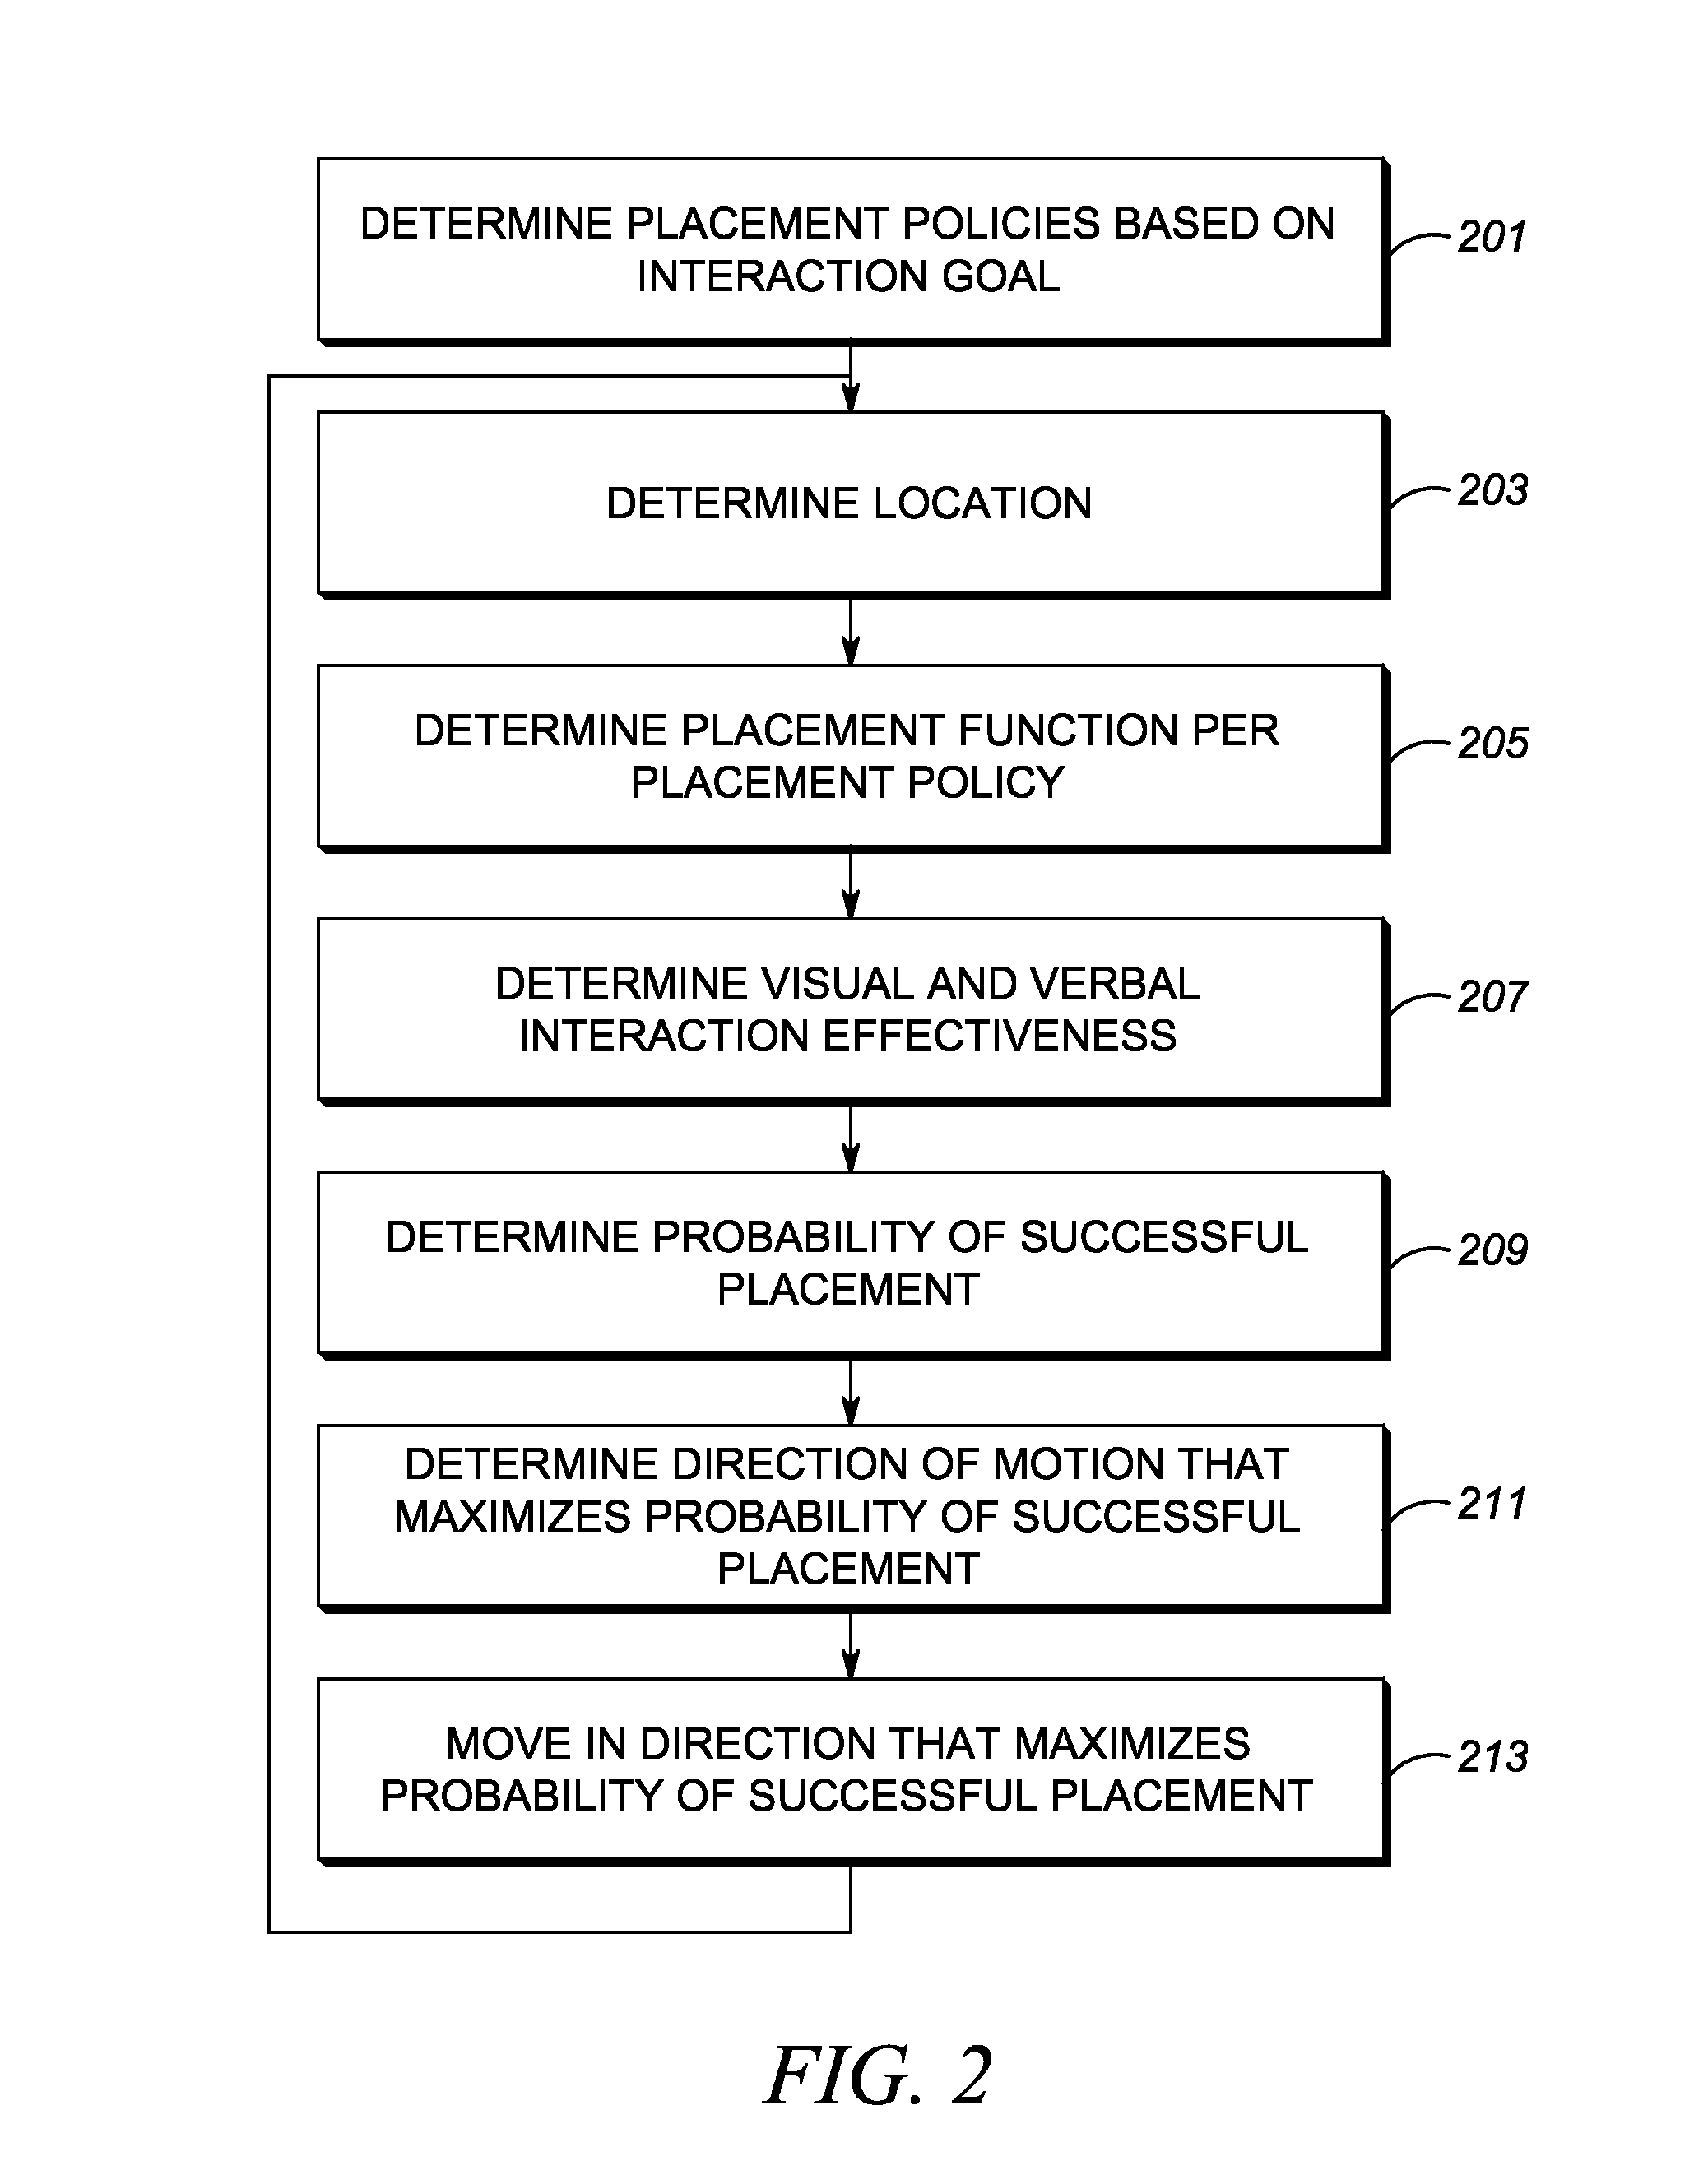 Method and apparatus for positioning an unmanned vehicle in proximity to a person or an object based jointly on placement policies and probability of successful placement